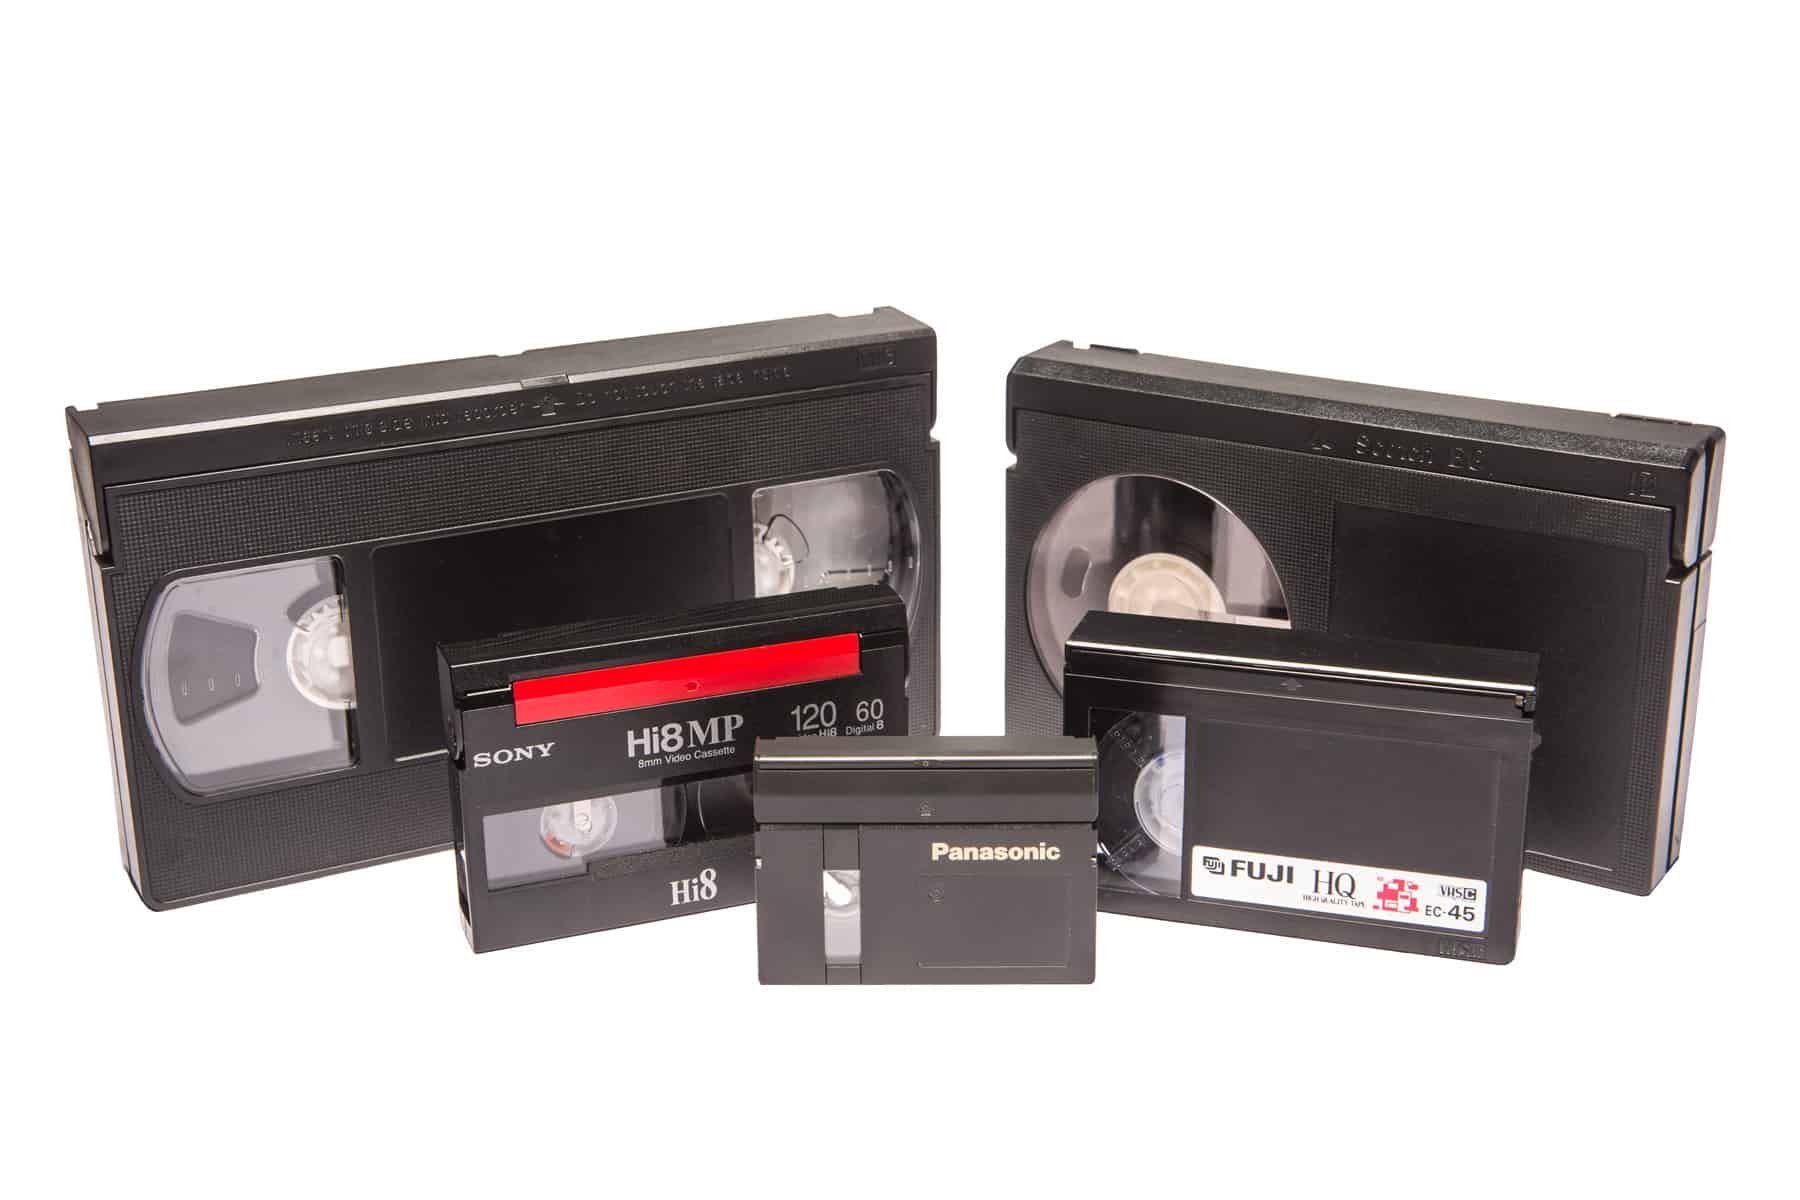 It's not just VHS to DVD, we can convert any of your old video tapes to USB or DVD and save them from fading and further deterioration. Let us expertly transfer your video to DVD or video file utilising professional video equipment.